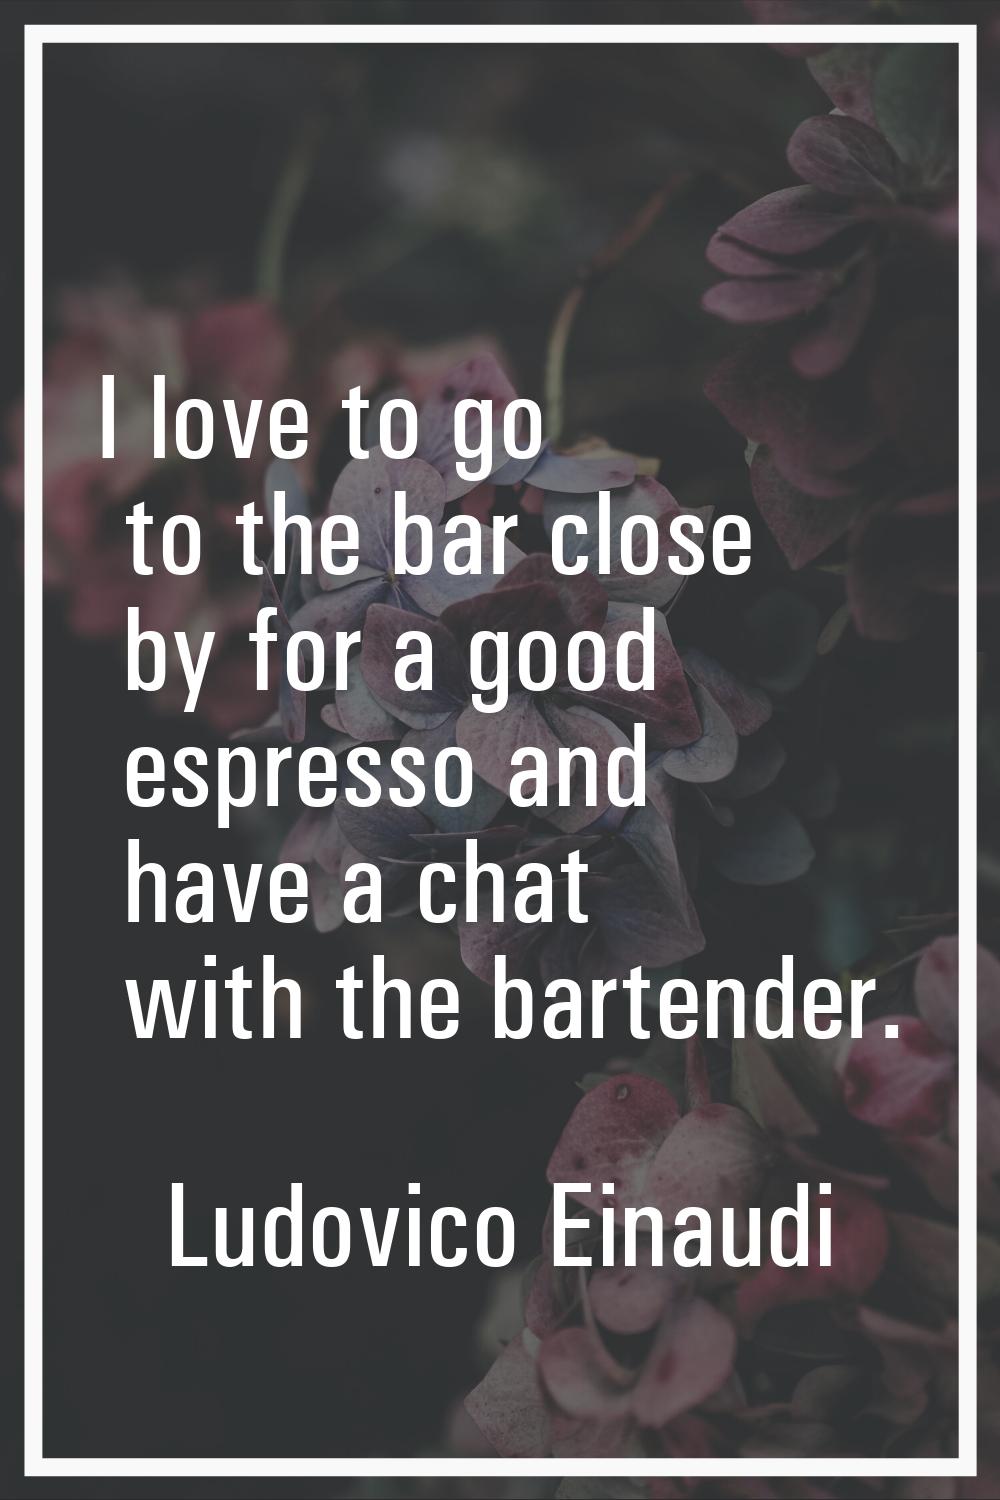 I love to go to the bar close by for a good espresso and have a chat with the bartender.